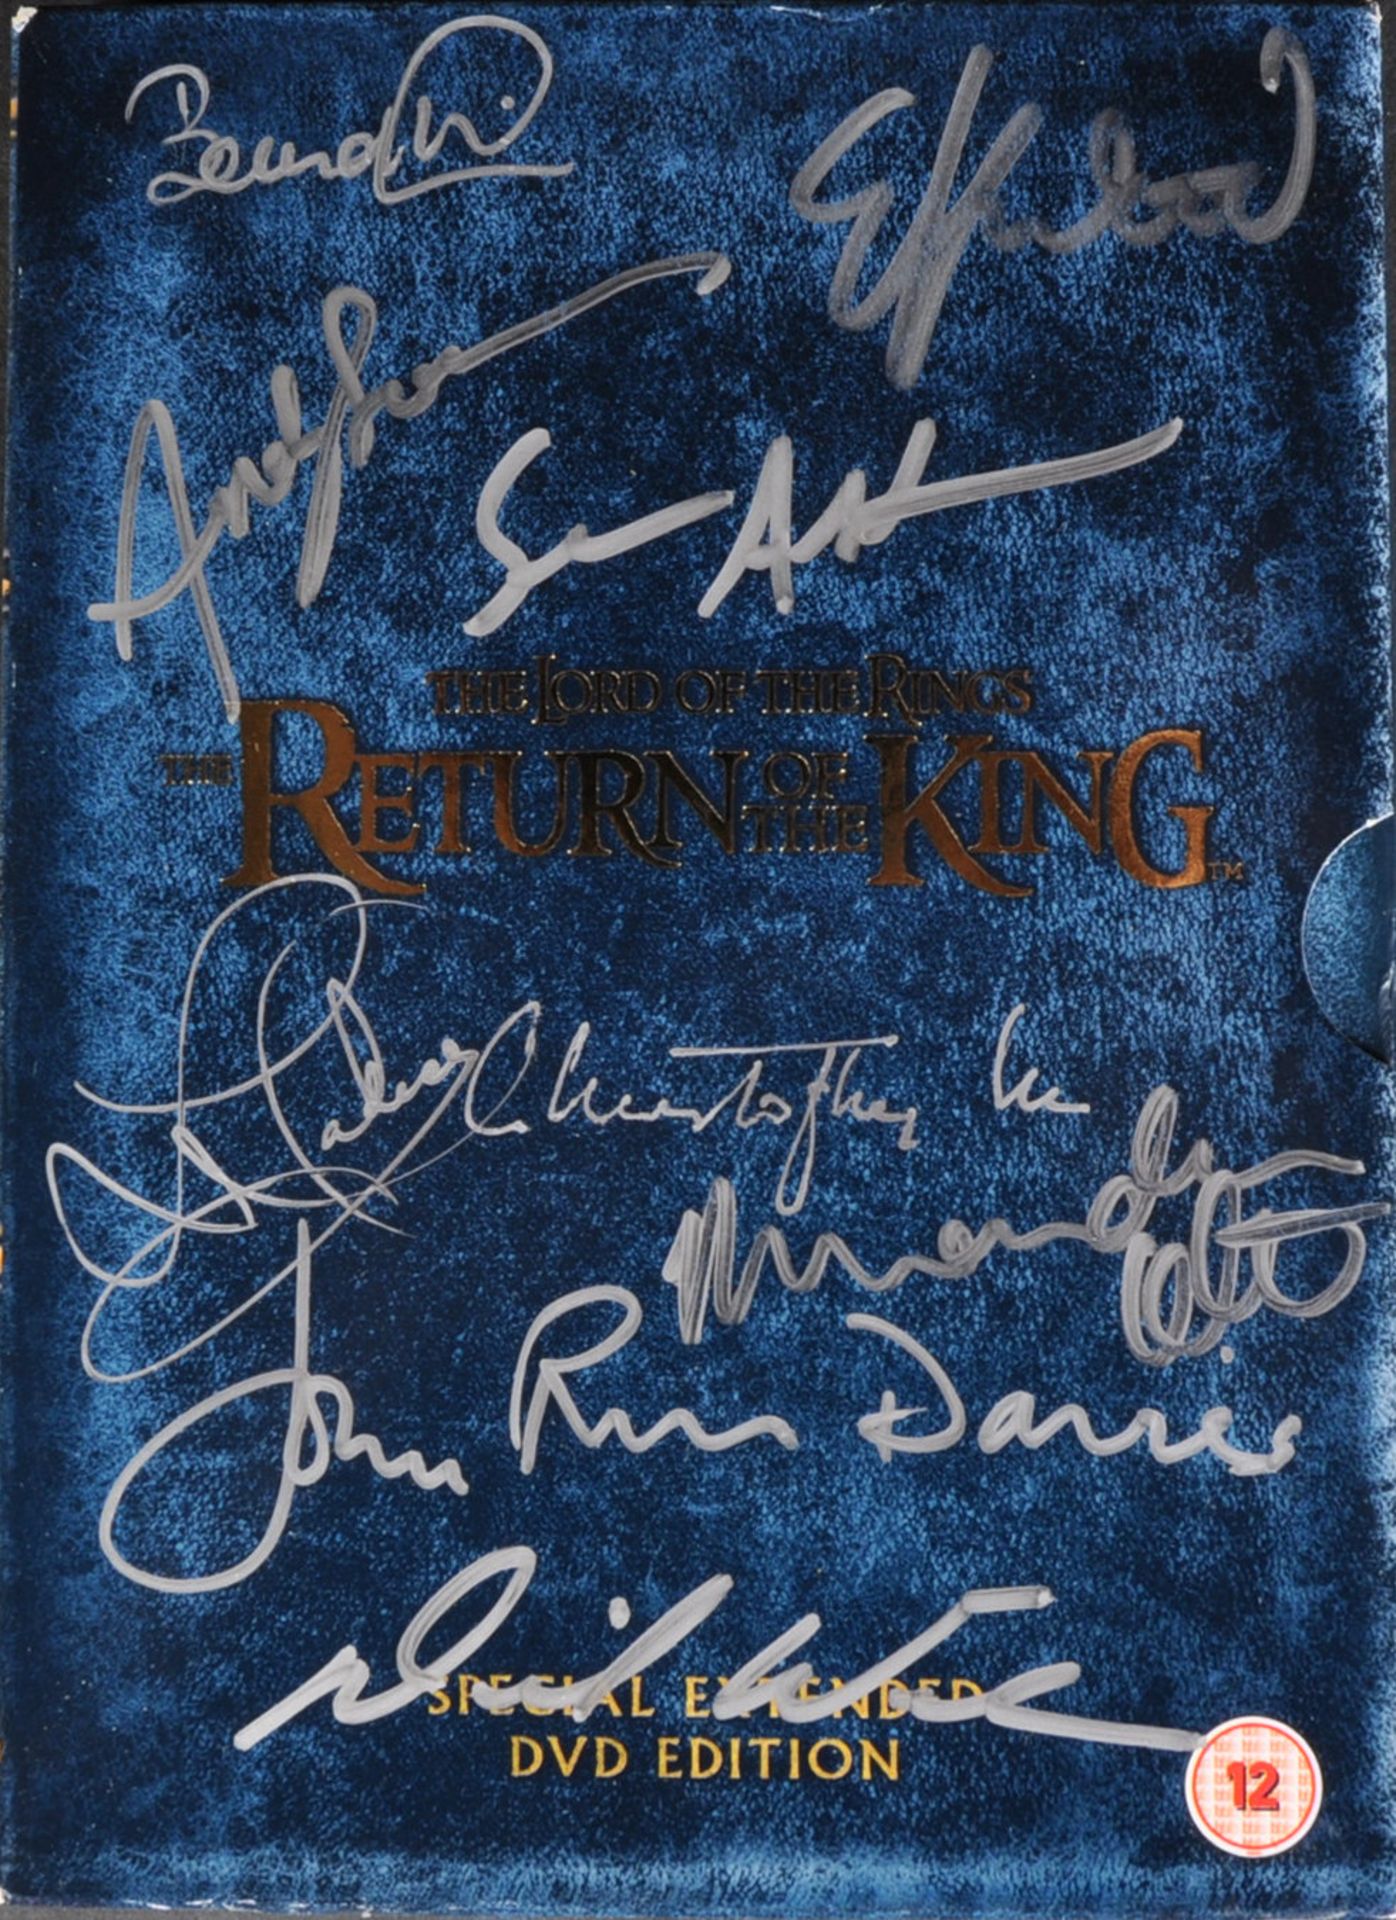 LORD OF THE RINGS - RETURN OF THE KING - MULTI-SIGNED DVD